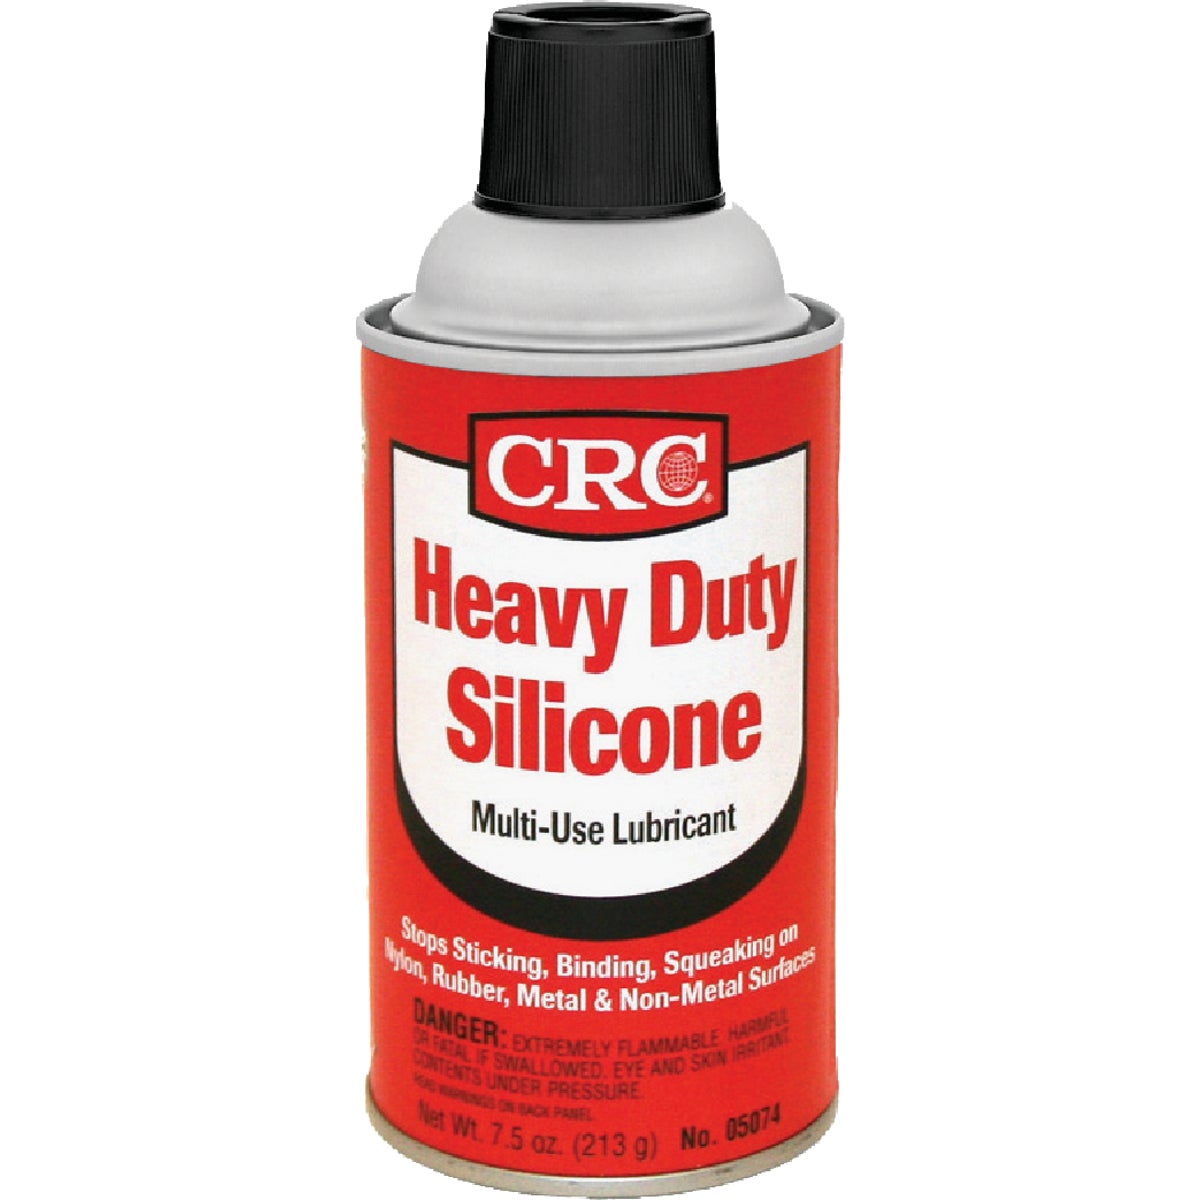 Item 589292, A noncorrosive formula that lubricates, protects and eliminates squeaking 